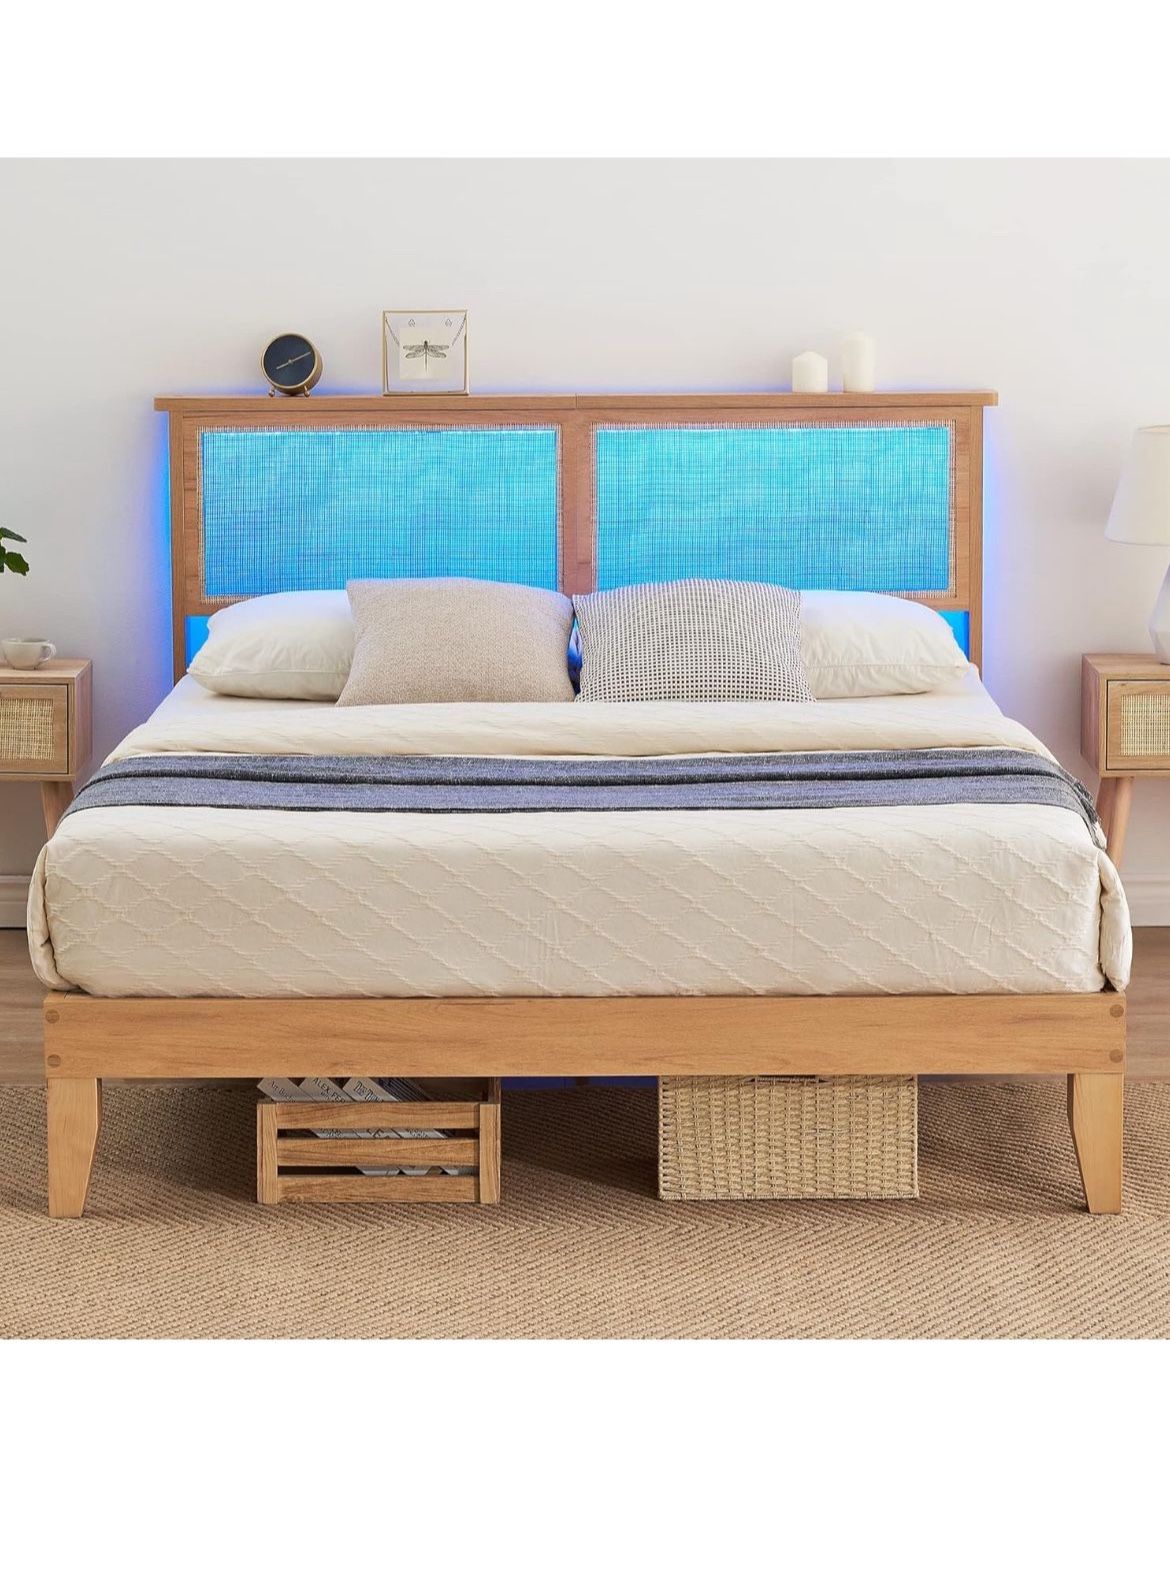 Solid Wood Queen Bed Frame with Natural Rattan Headboard and accent lights- new in box